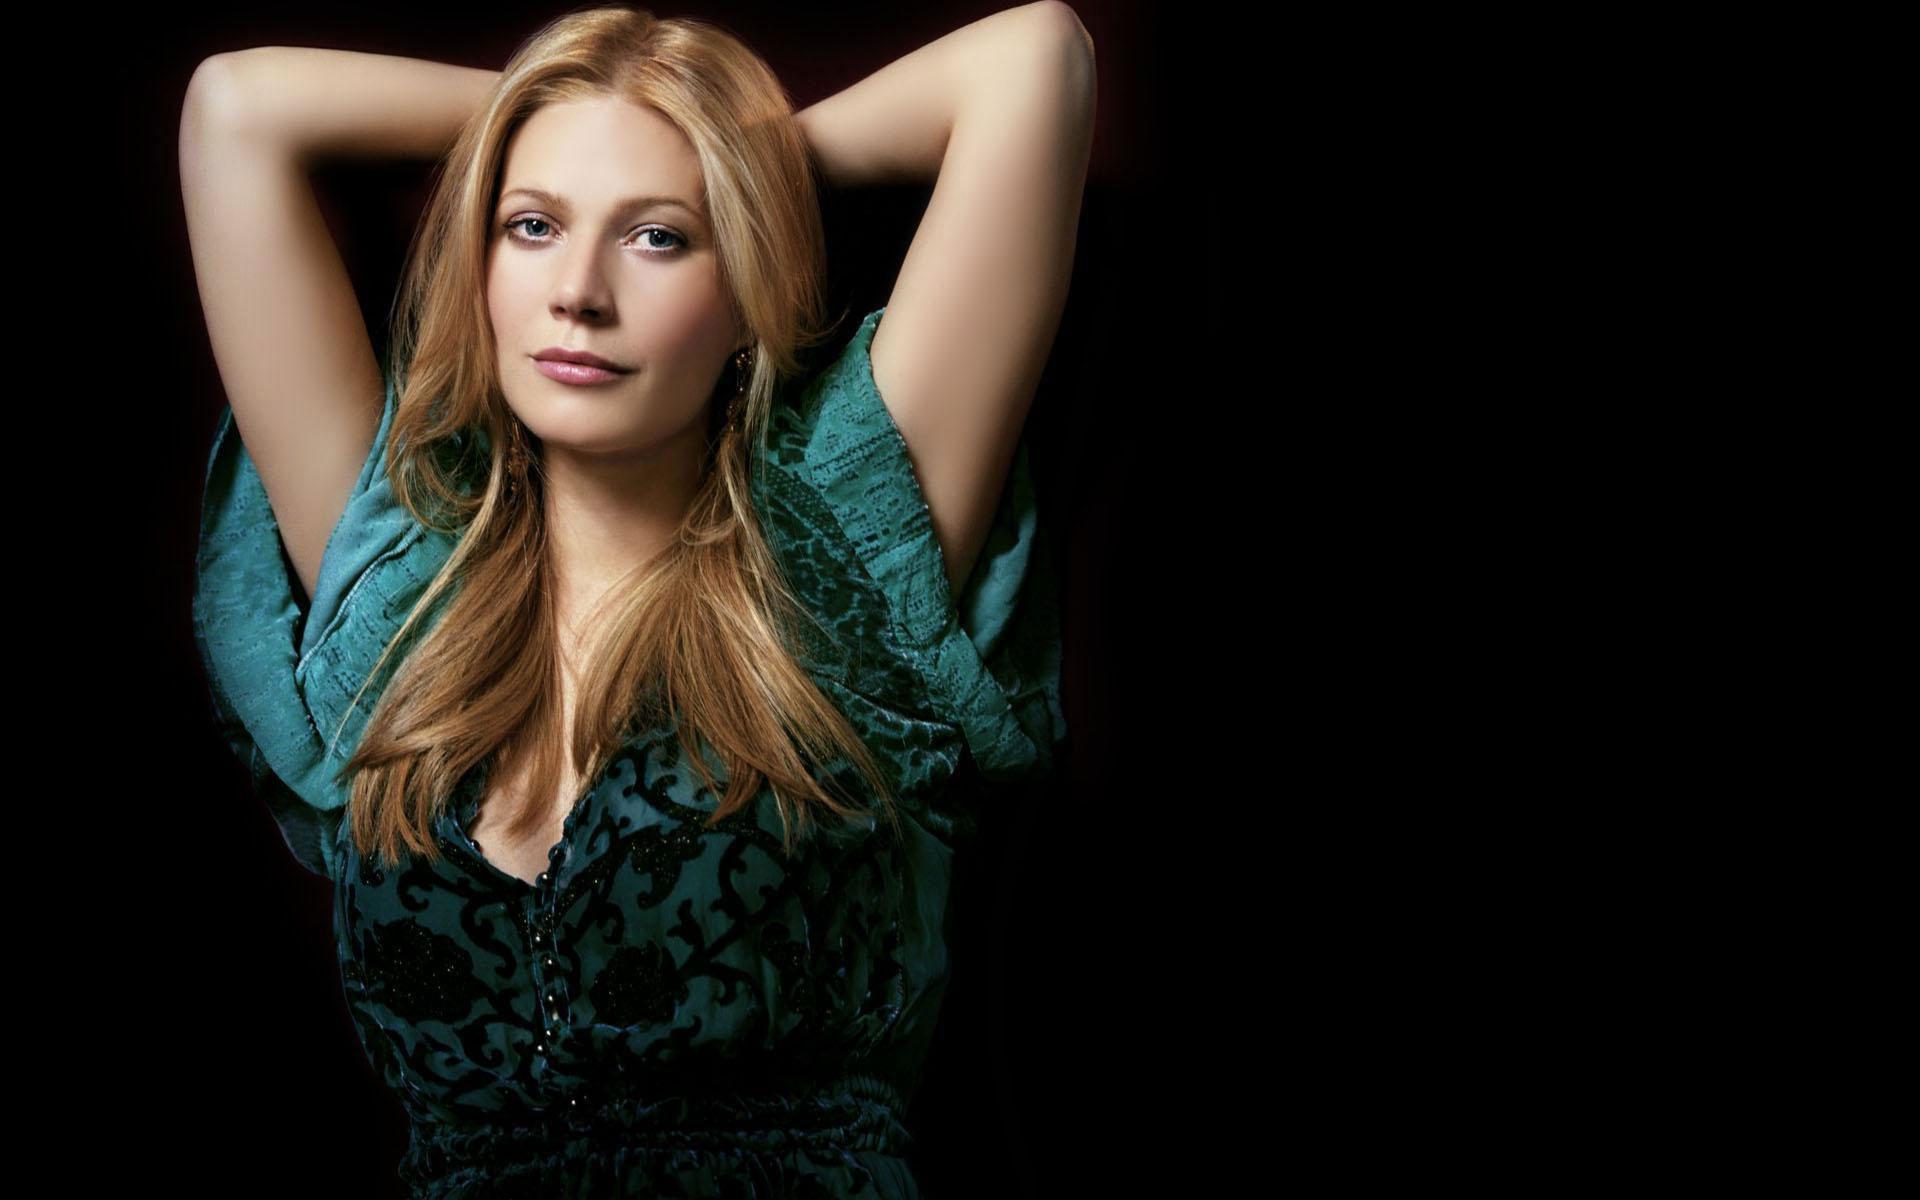 Gwyneth Paltrow from Iron Man HD Actor Wallpaper on ActorFaces